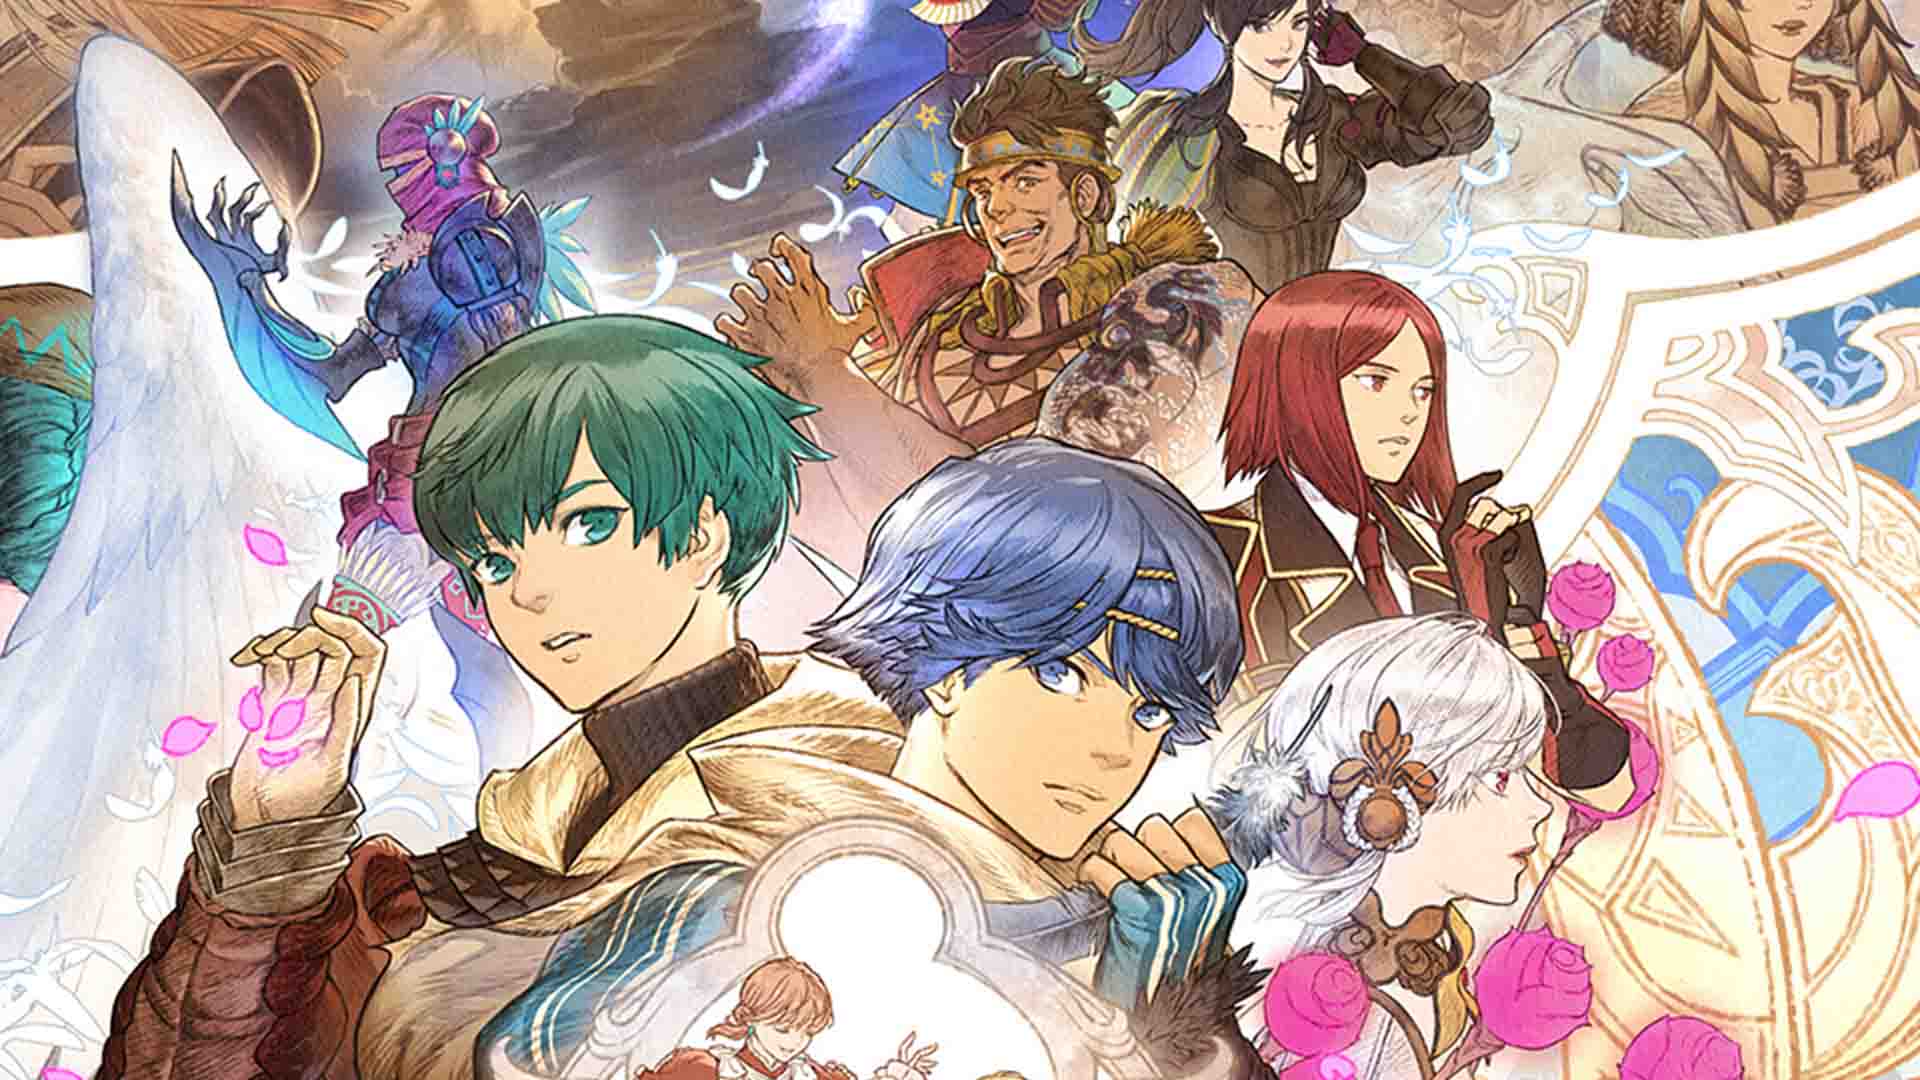 Baten Kaitos 1 and 2 remasters are coming to Switch this September